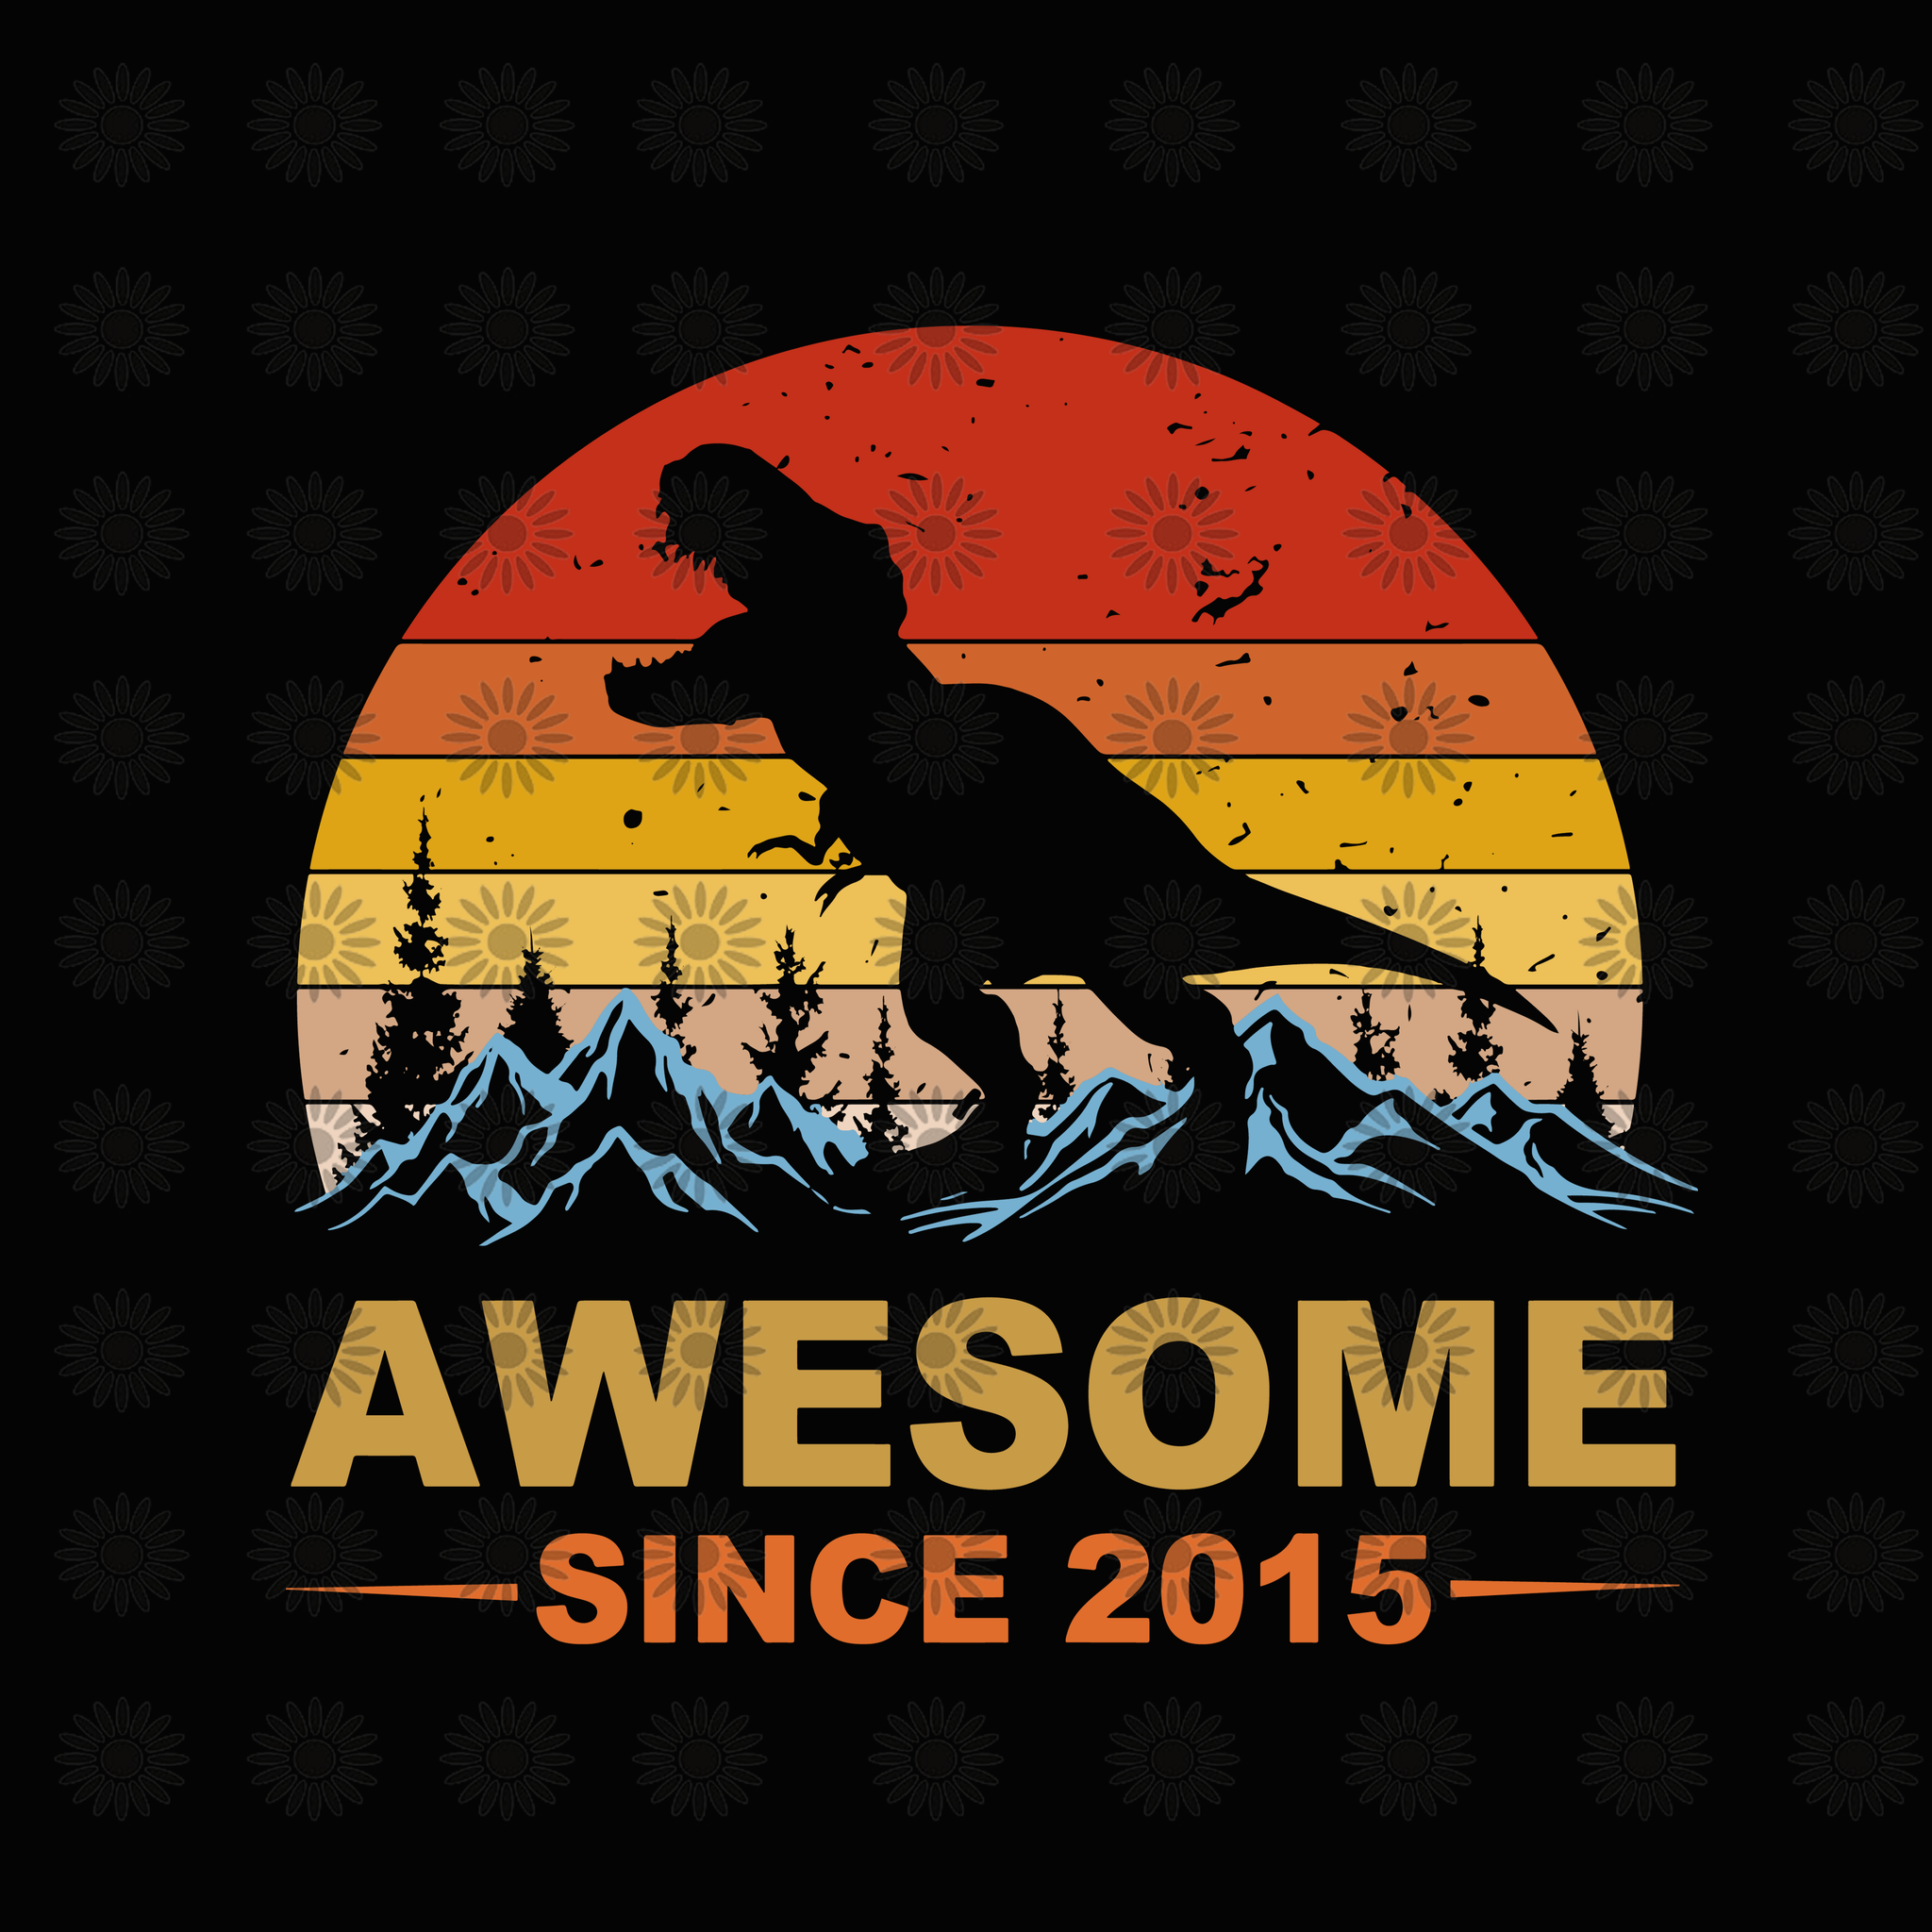 Awesome since 2015 dinosaur svg, Awesome since 2015 dinosaur, Awesome since 2015 dinosaur vintage, dinosaur svg, dinosaur png, eps, dxf, svg file